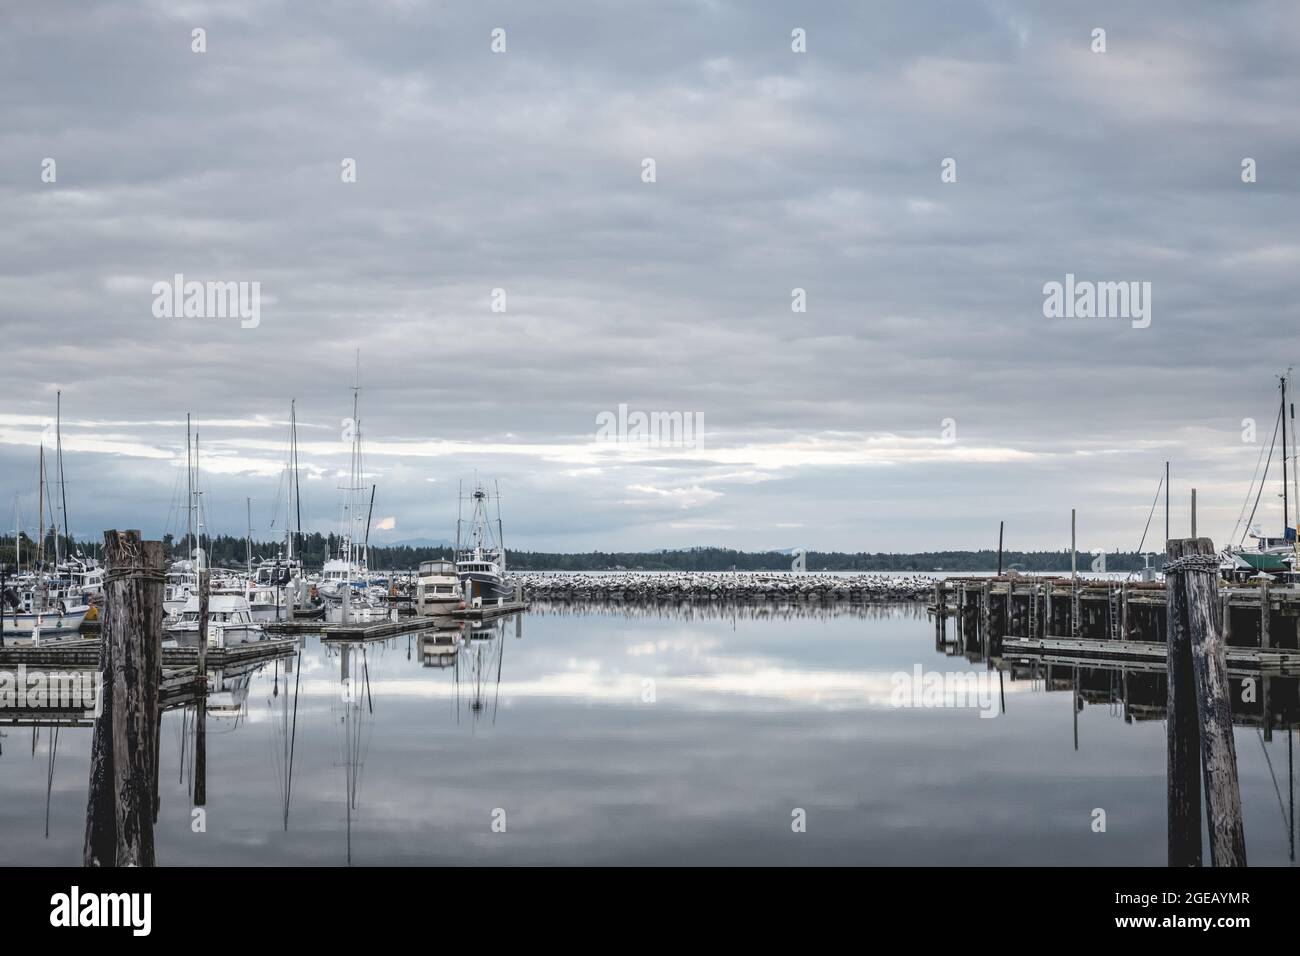 Clouds reflecting on the water at Blaine Harbor in Blaine, Washington. Stock Photo